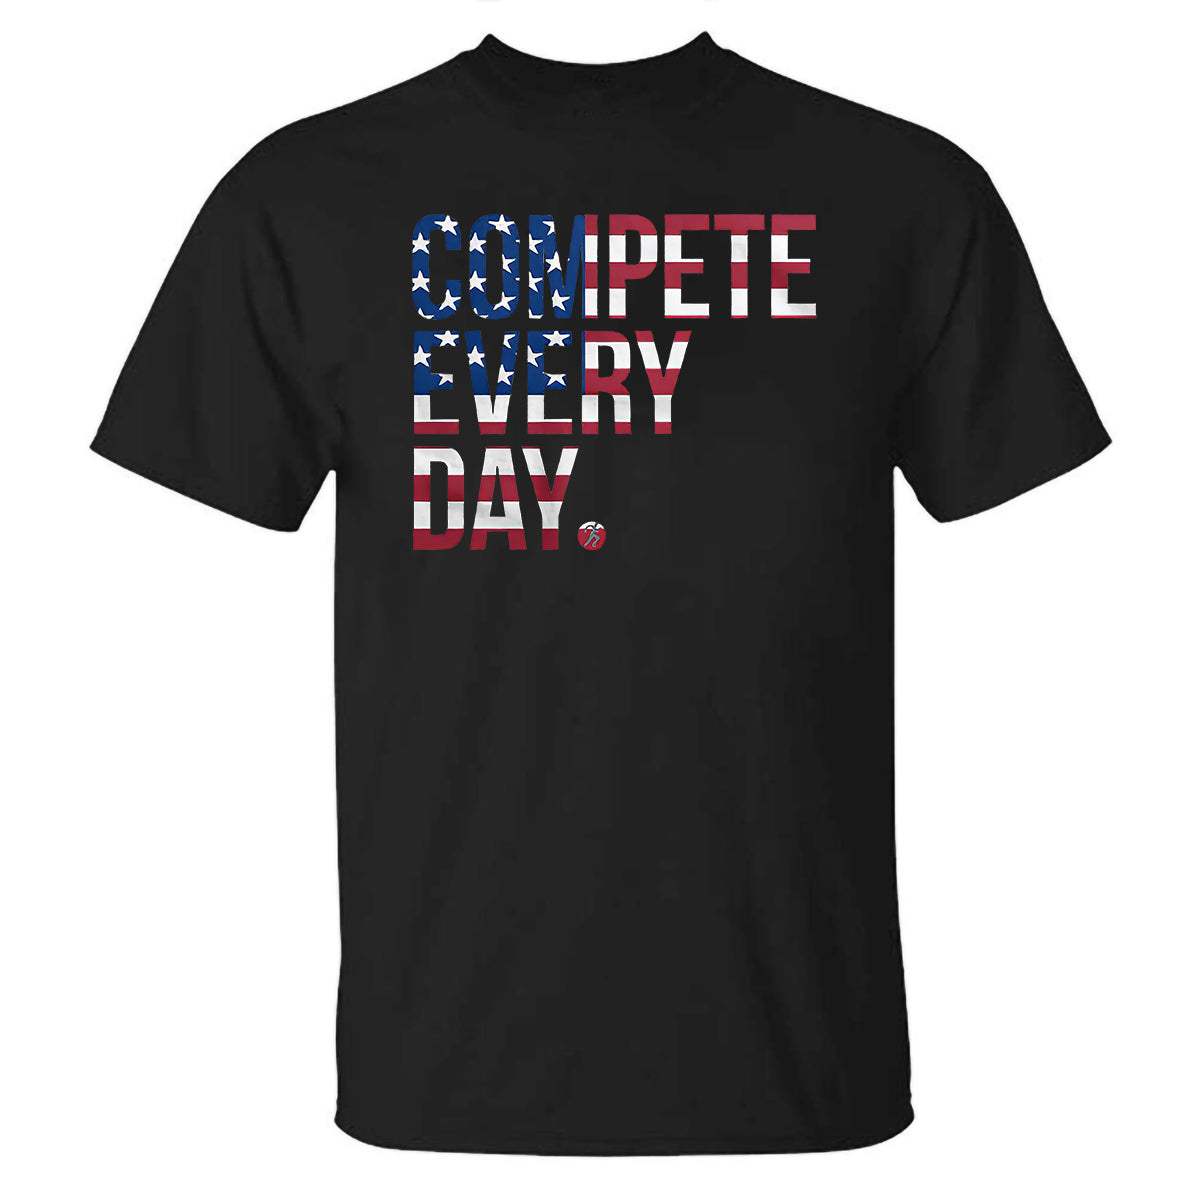 Compete Every Day American Flag Printed T-shirt